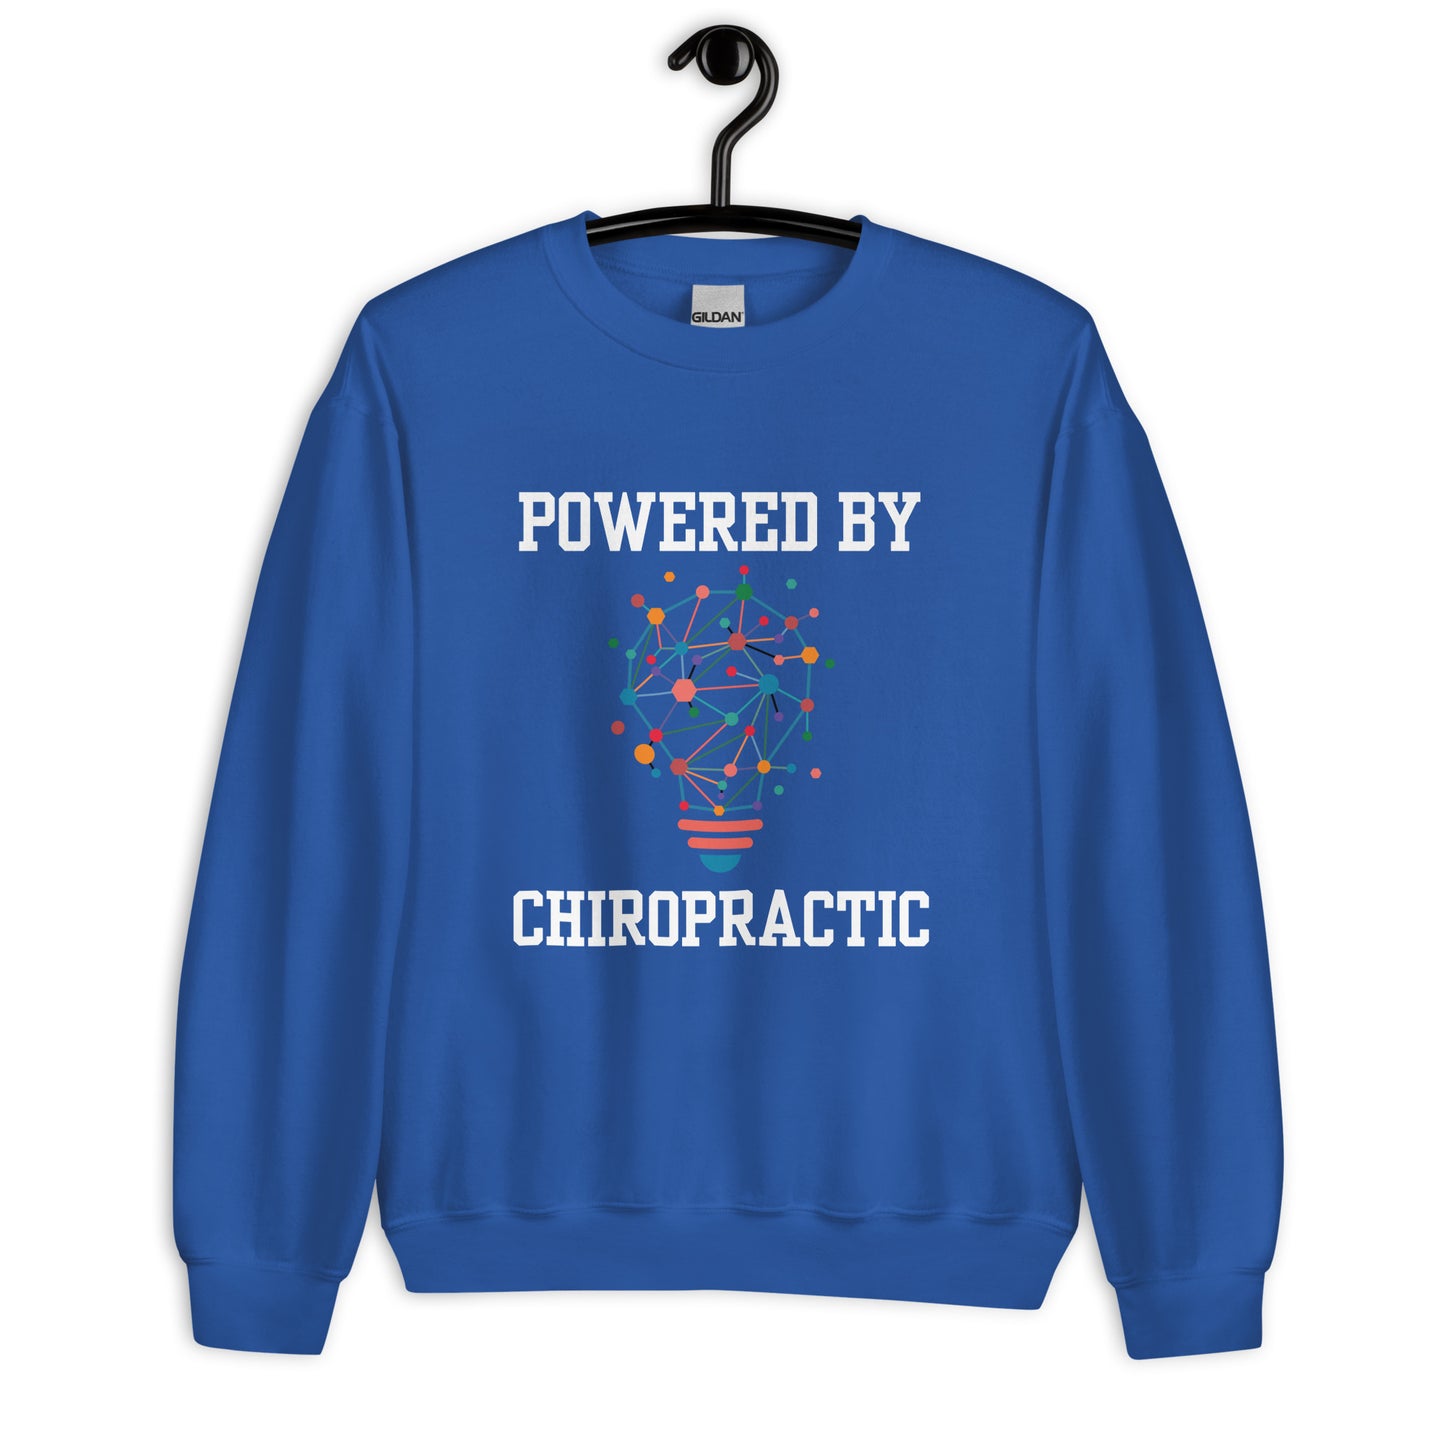 Powered by Chiropractic